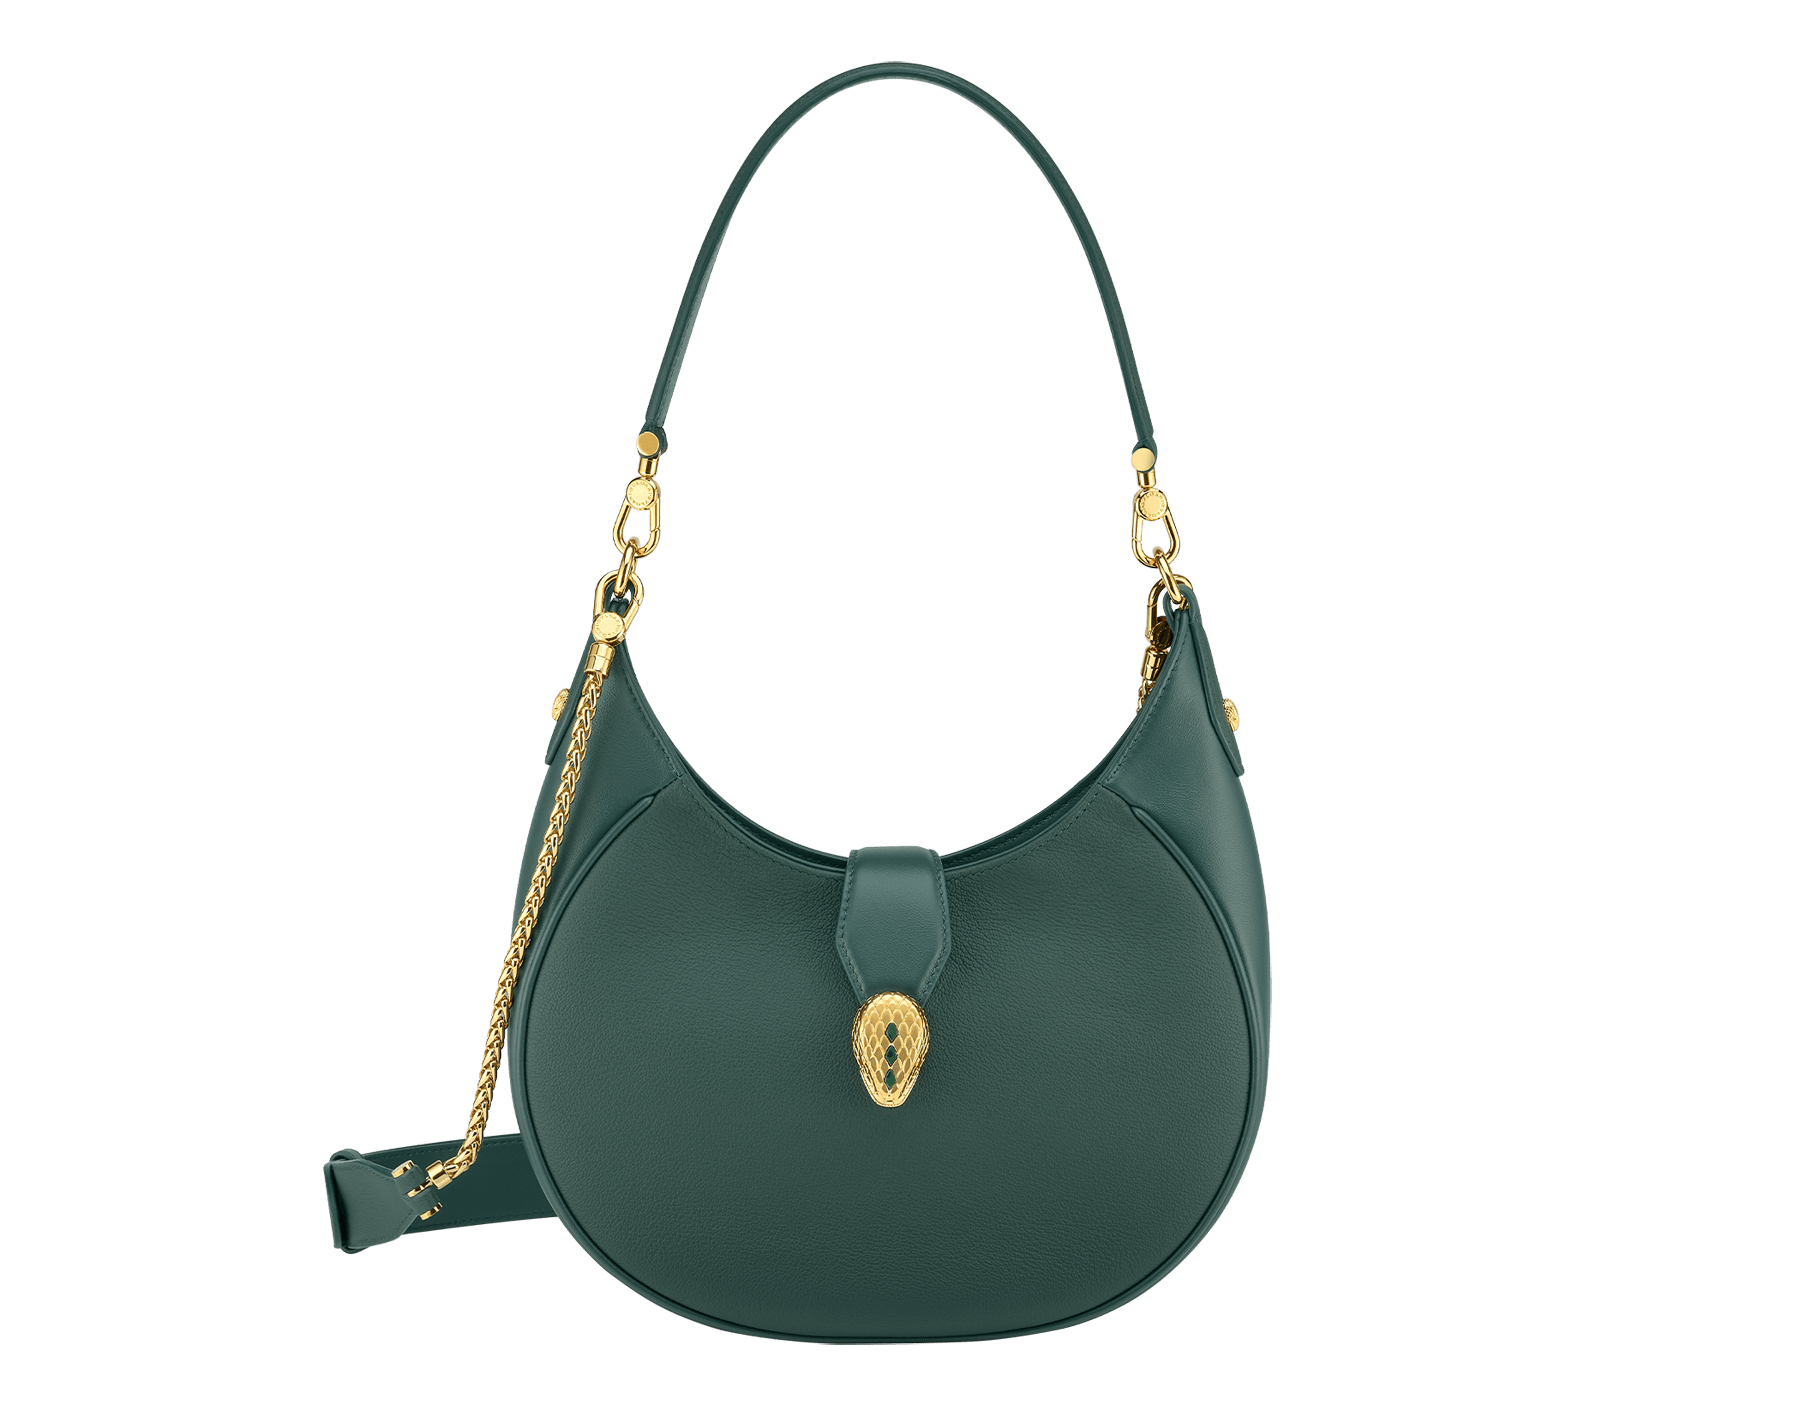 Serpenti Ellipse medium shoulder bag in Urban grain and smooth ivory opal calf leather with flamingo quartz pink grosgrain lining. Captivating snakehead closure in gold-plated brass embellished with black onyx scales and red enamel eyes. 1190-UCL image 1